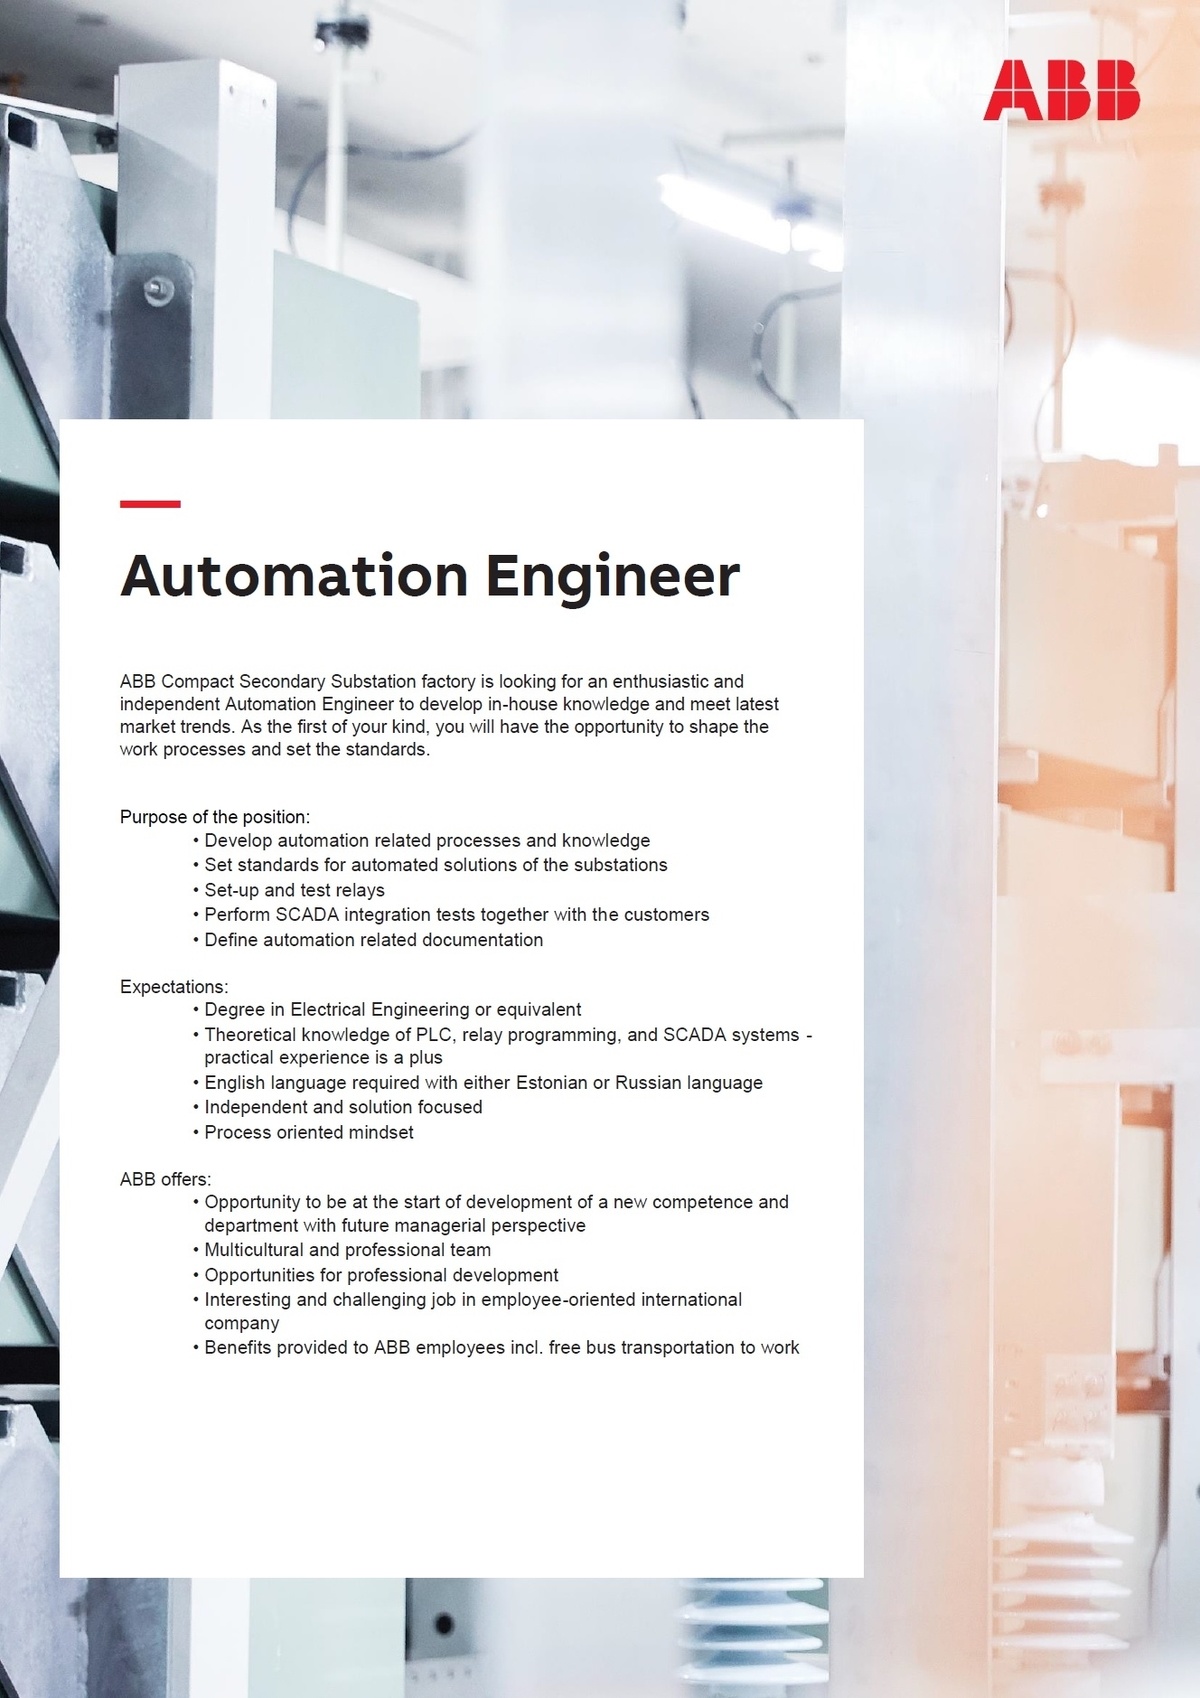 ABB AS Automation Engineer